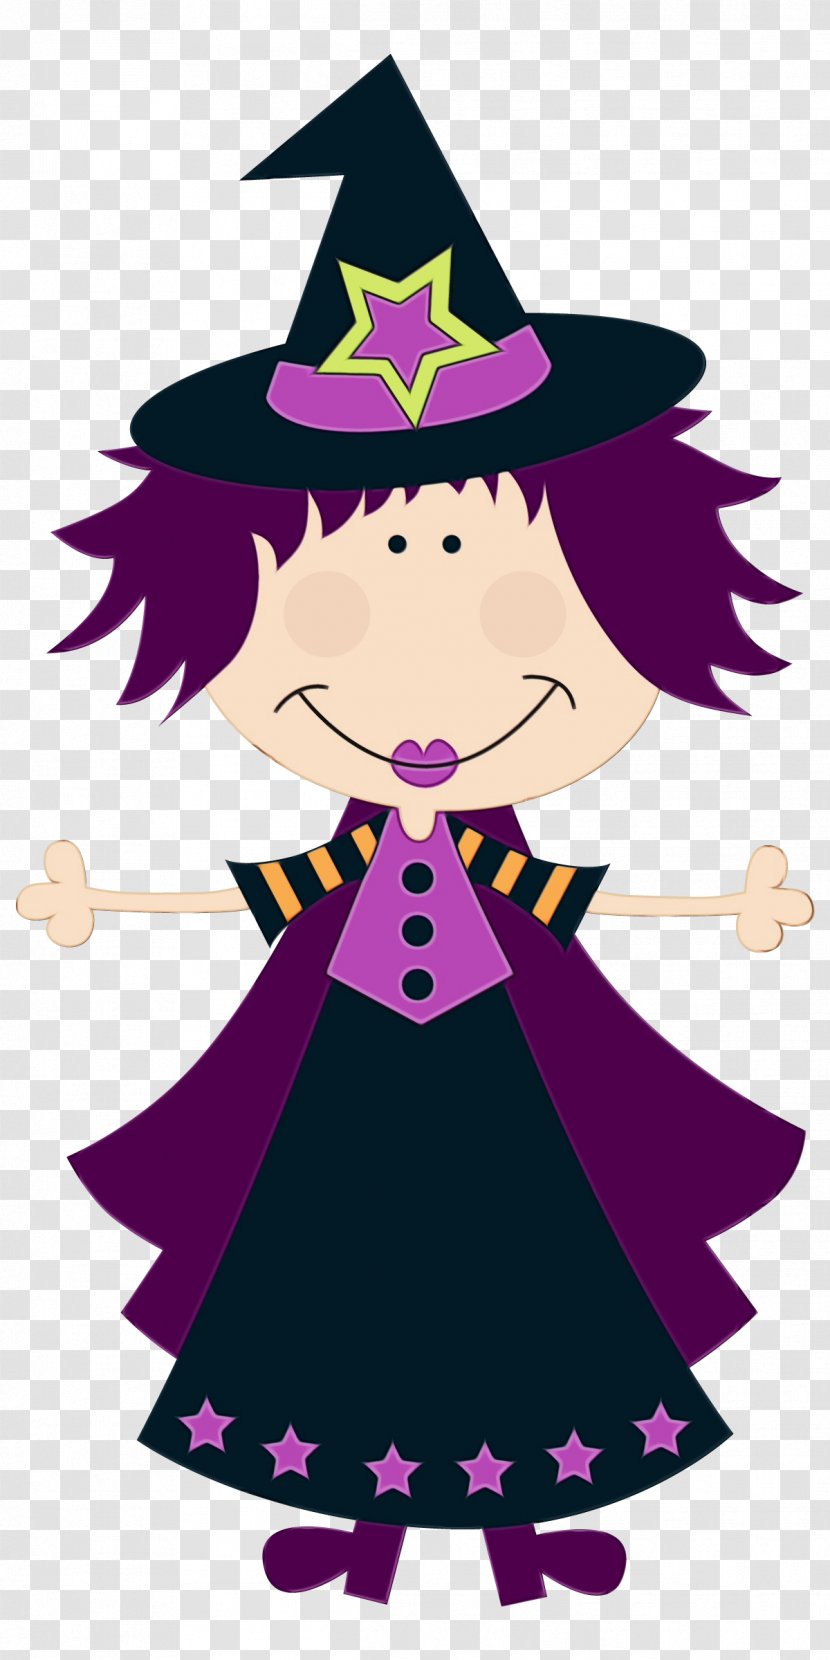 Halloween Witch Hat - Costume - Broom Accessory Transparent PNG